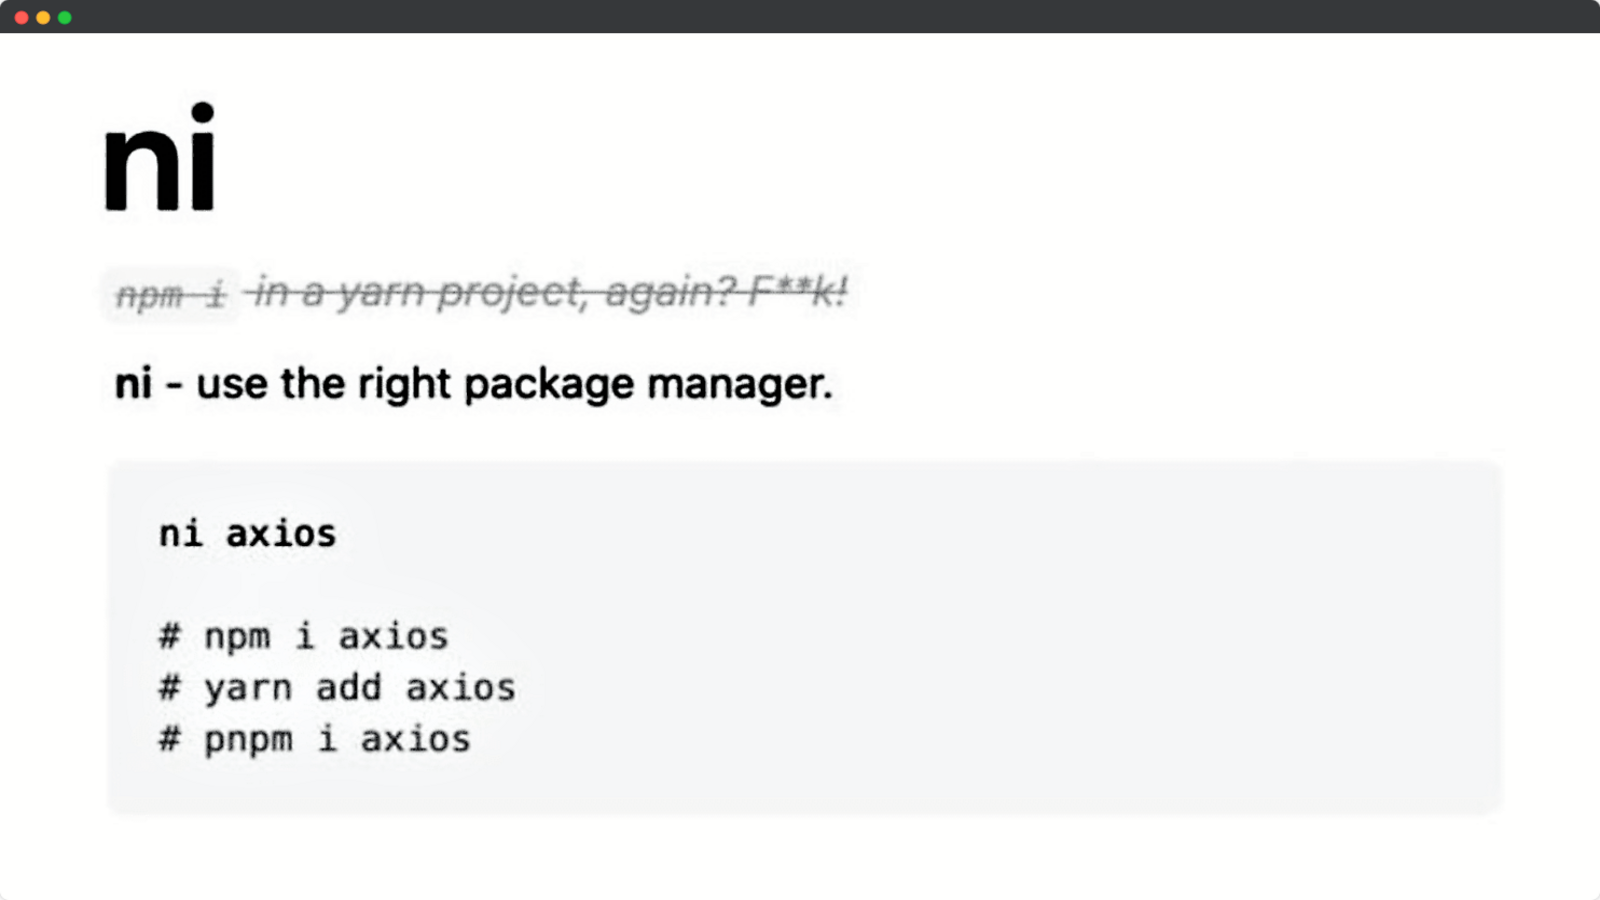 Use the right package manager